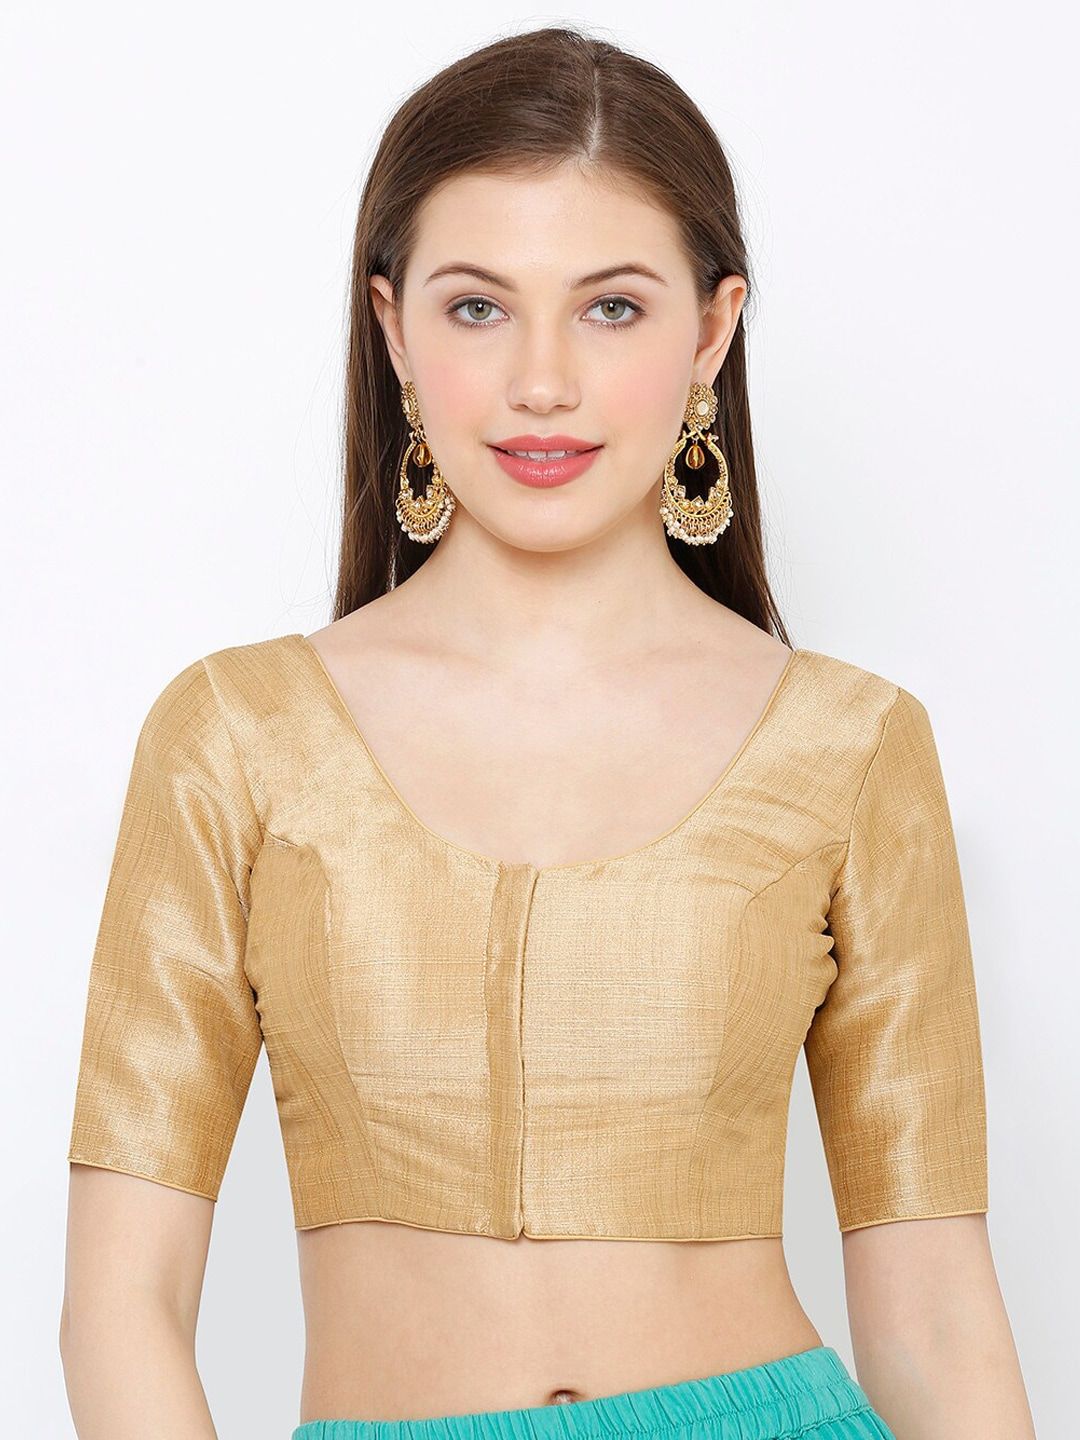 SALWAR STUDIO Women Gold-Toned Solid Readymade Mulberry Silk Saree Blouse Price in India